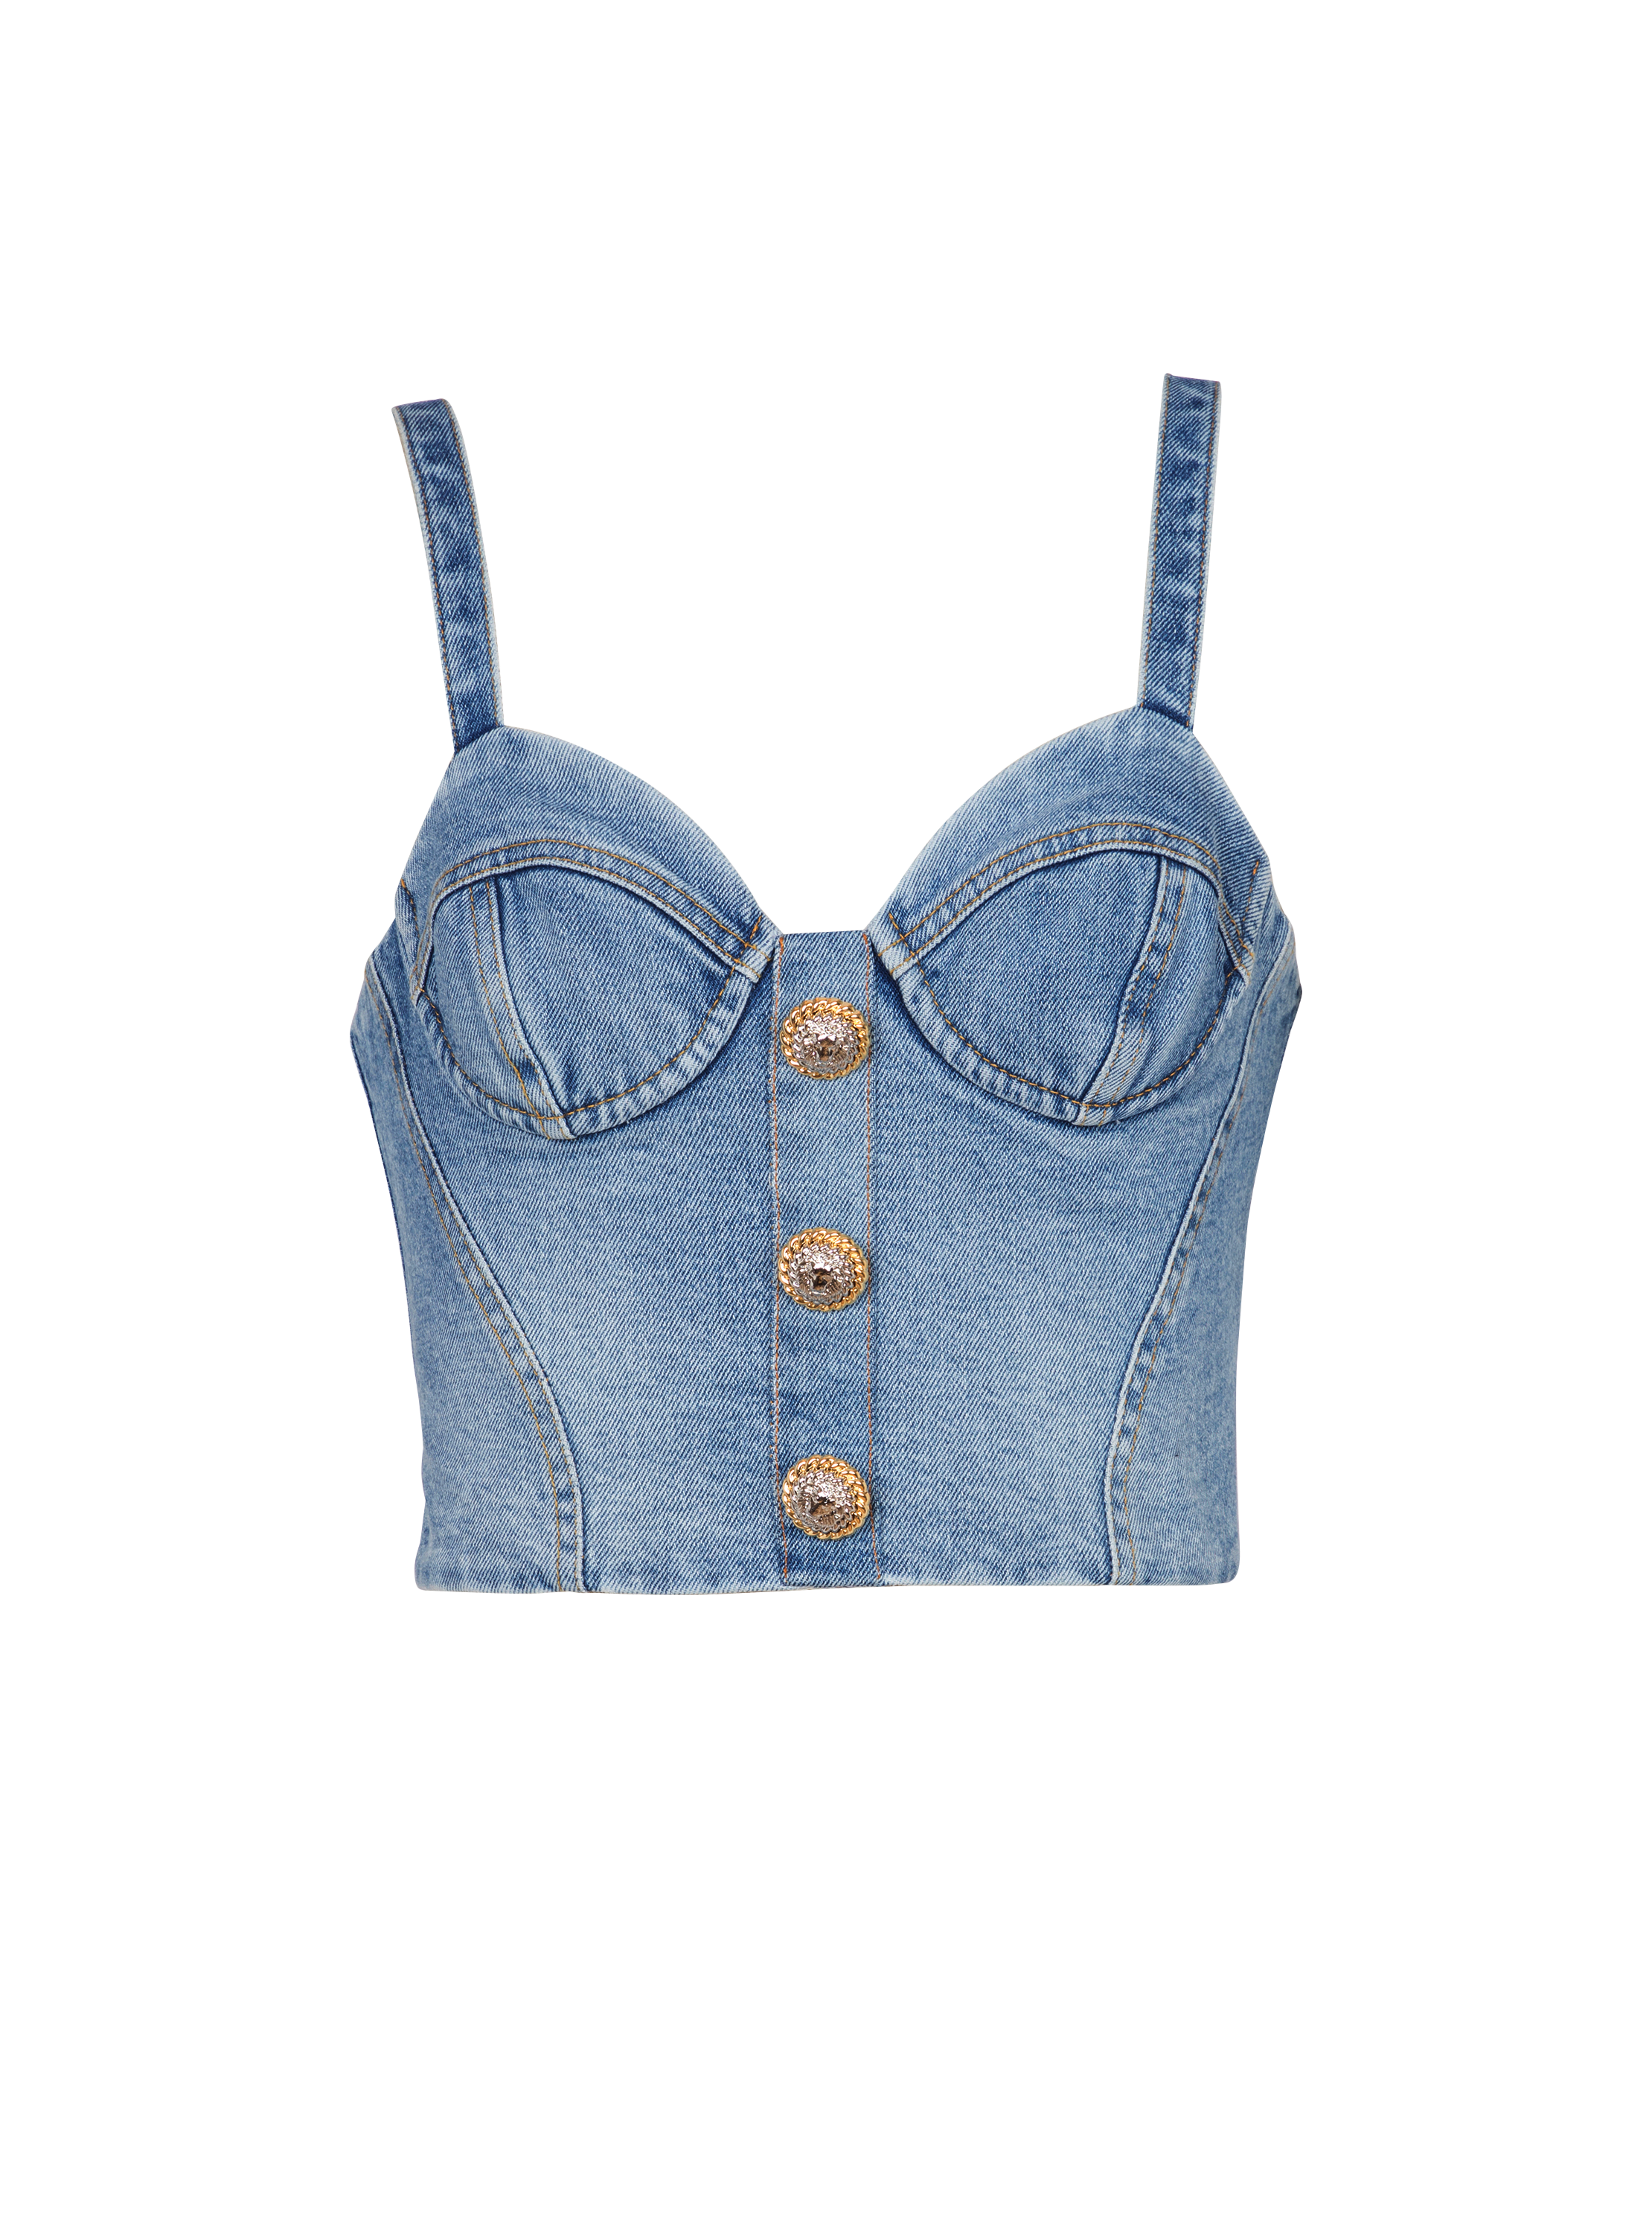 Denim top with thin straps